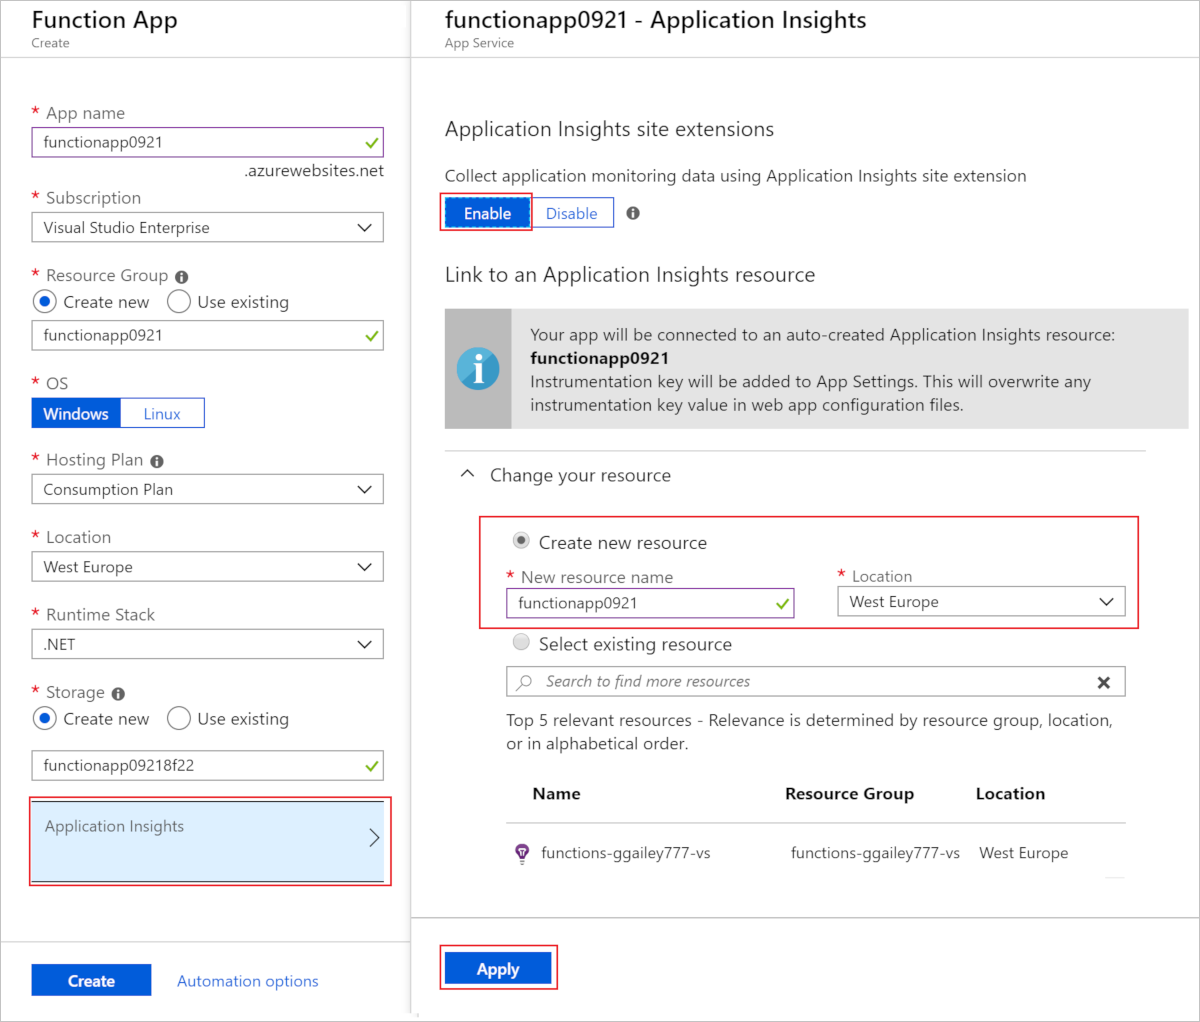 Enable Application Insights while creating a function app